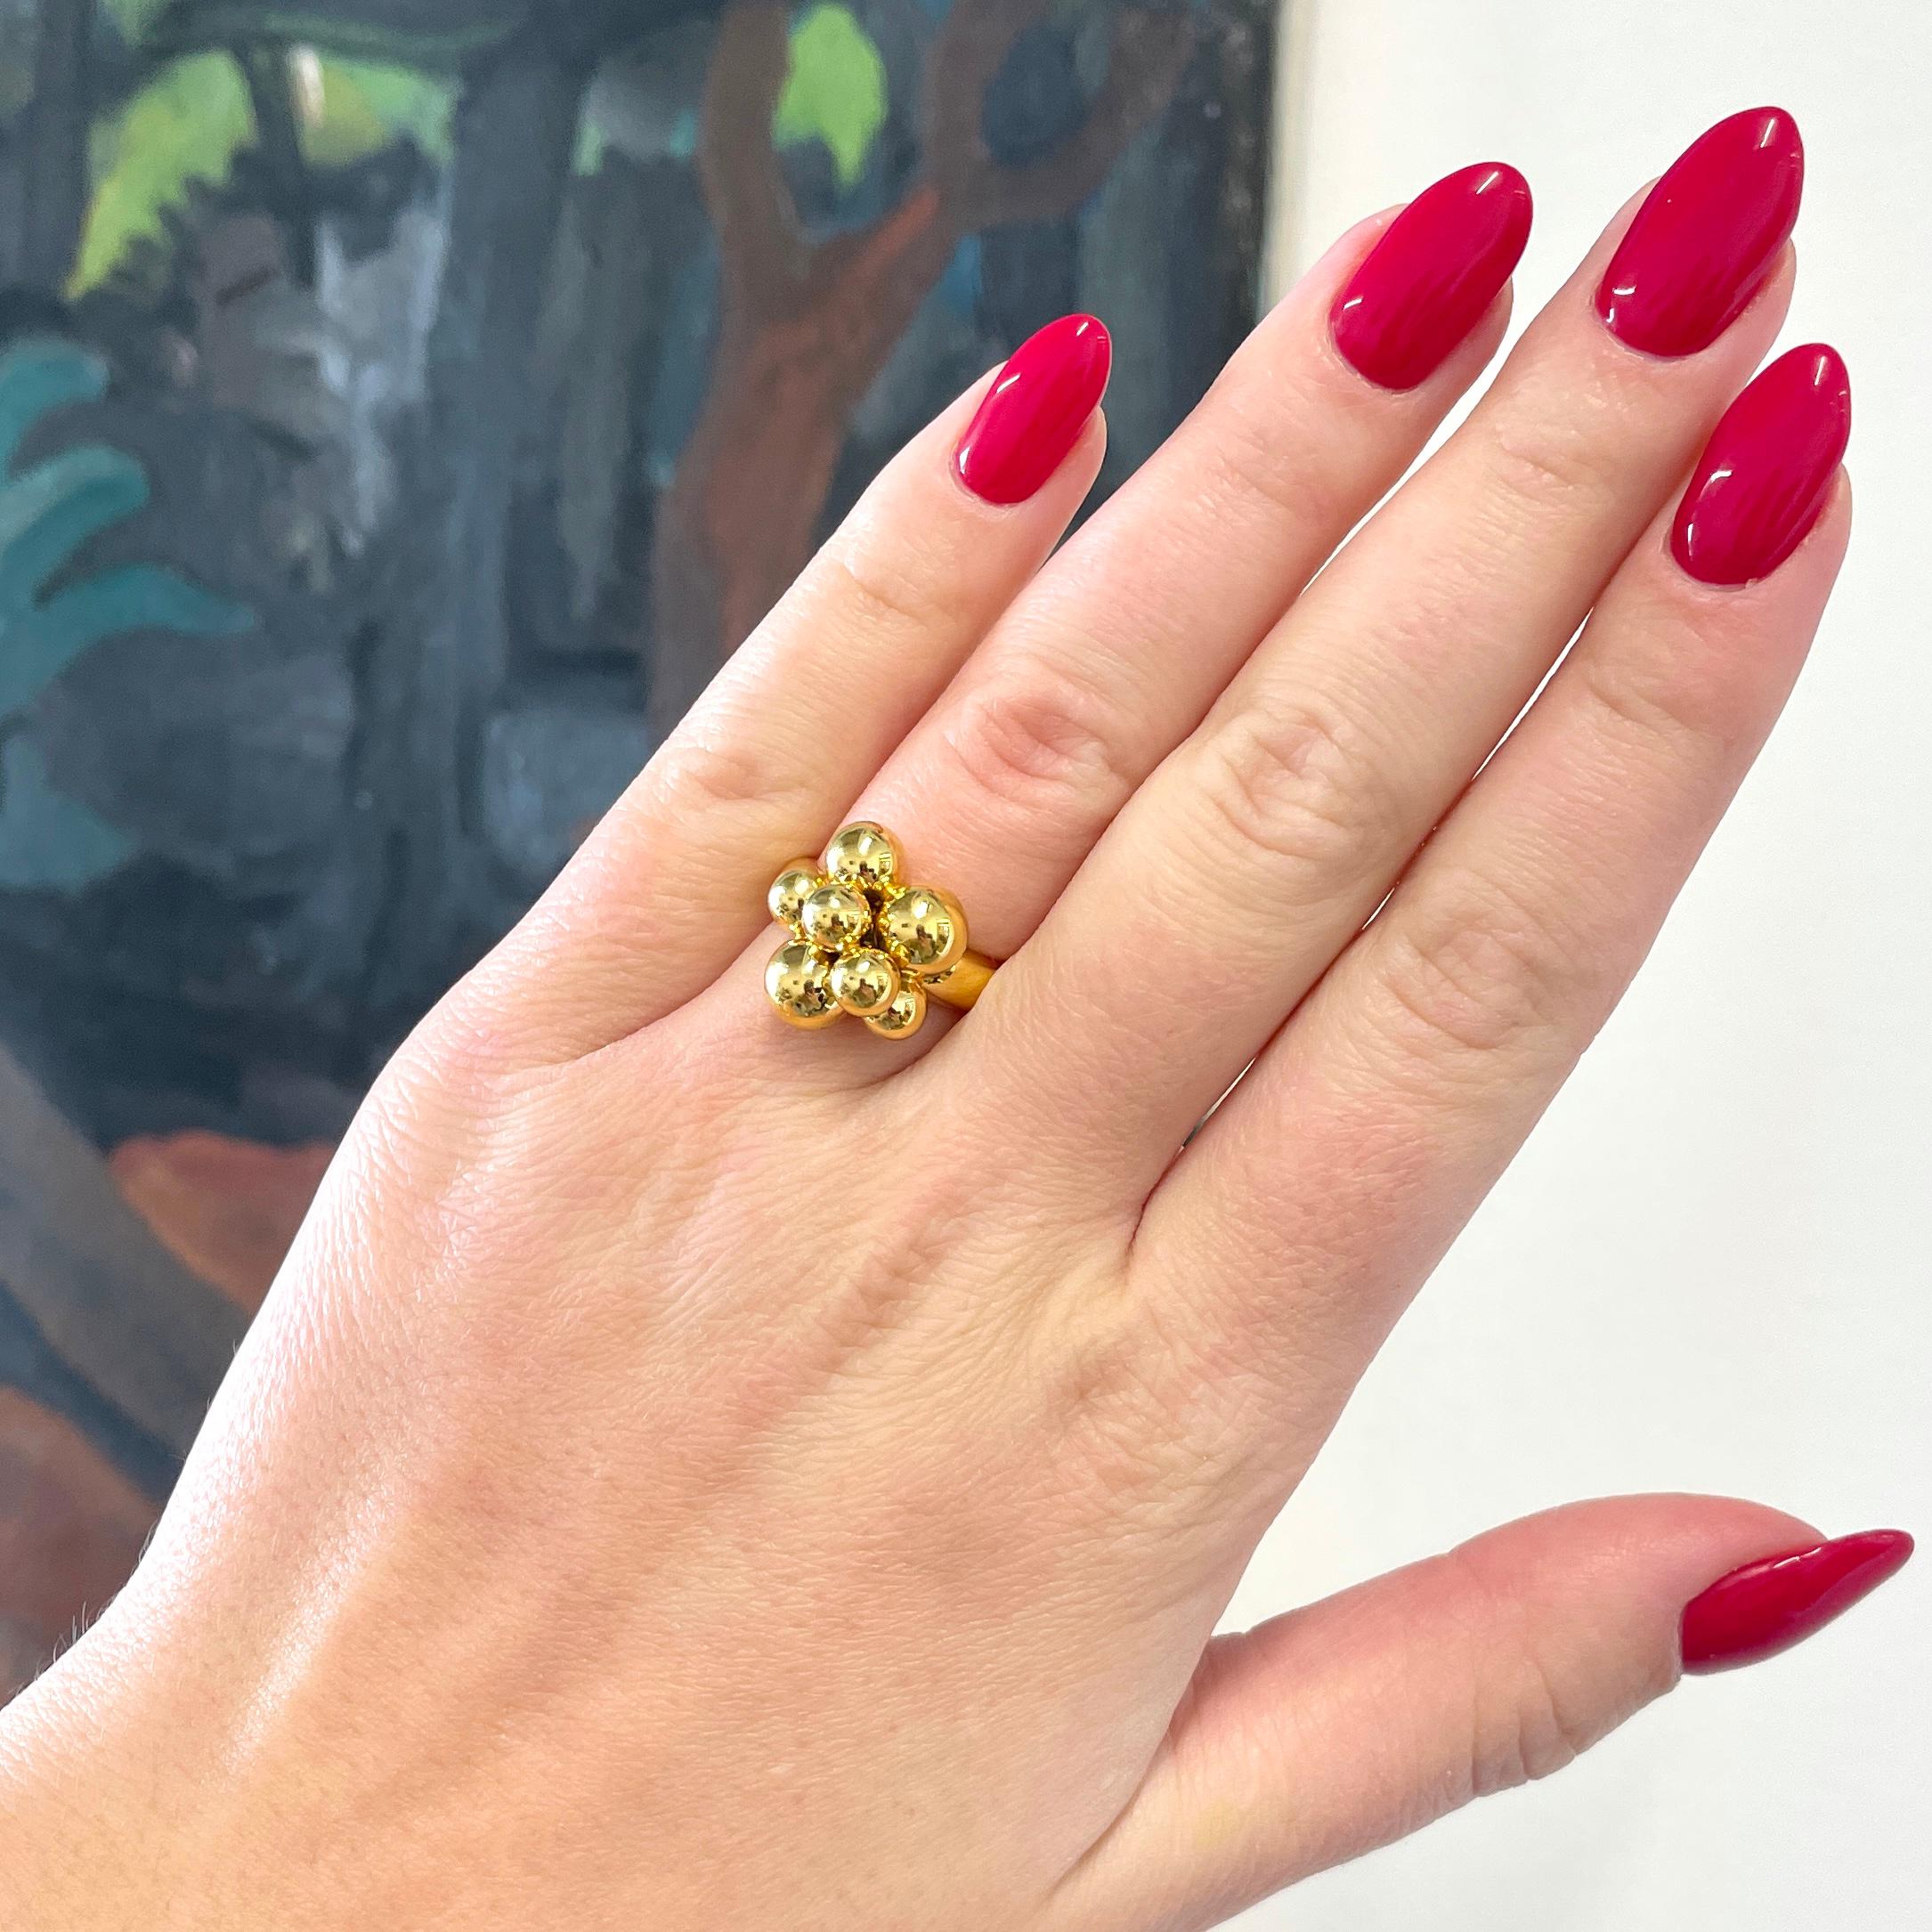 Treat yourself to a gold ring like no other. Solid large yellow gold and futuristic jewelry pieces are a very popular trend these days. This is Marina B Mini Atomo 18k Gold Ring. Signed #1885020. Circa 2010's.
Size 6 1/2 and can be resized, if